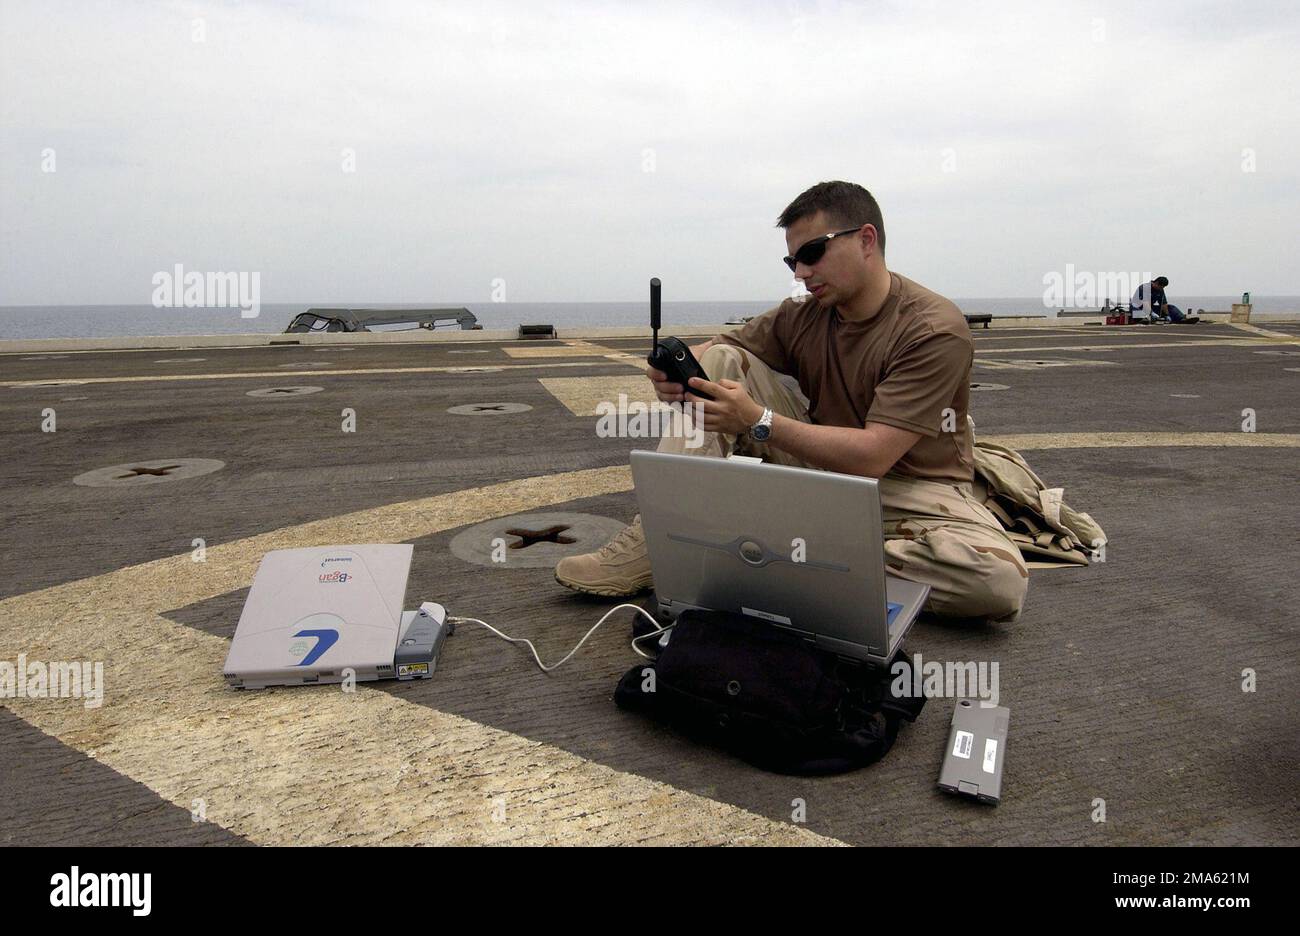 050419-N-7631T-002. [Complete] Scene Caption: US Navy (USN) Photographer's Mate First Class (PH1) Aaron Ansarov, attached to Fleet Combat Camera, Atlantic, calls his chief using an Iridium Satellite phone informing him of imagery being transmitted via Regional Broadband Global Area Network (RBGAN) satellite transmitter while onboard the Austin Class Amphibious Transport Dock ship USS DULUTH (LPD 6). Both Iridium and RBGAN allow deployed combat camera teams the ability to move imagery any time, anywhere with access to the Internet and phone lines in some of the most remote areas through out the Stock Photo